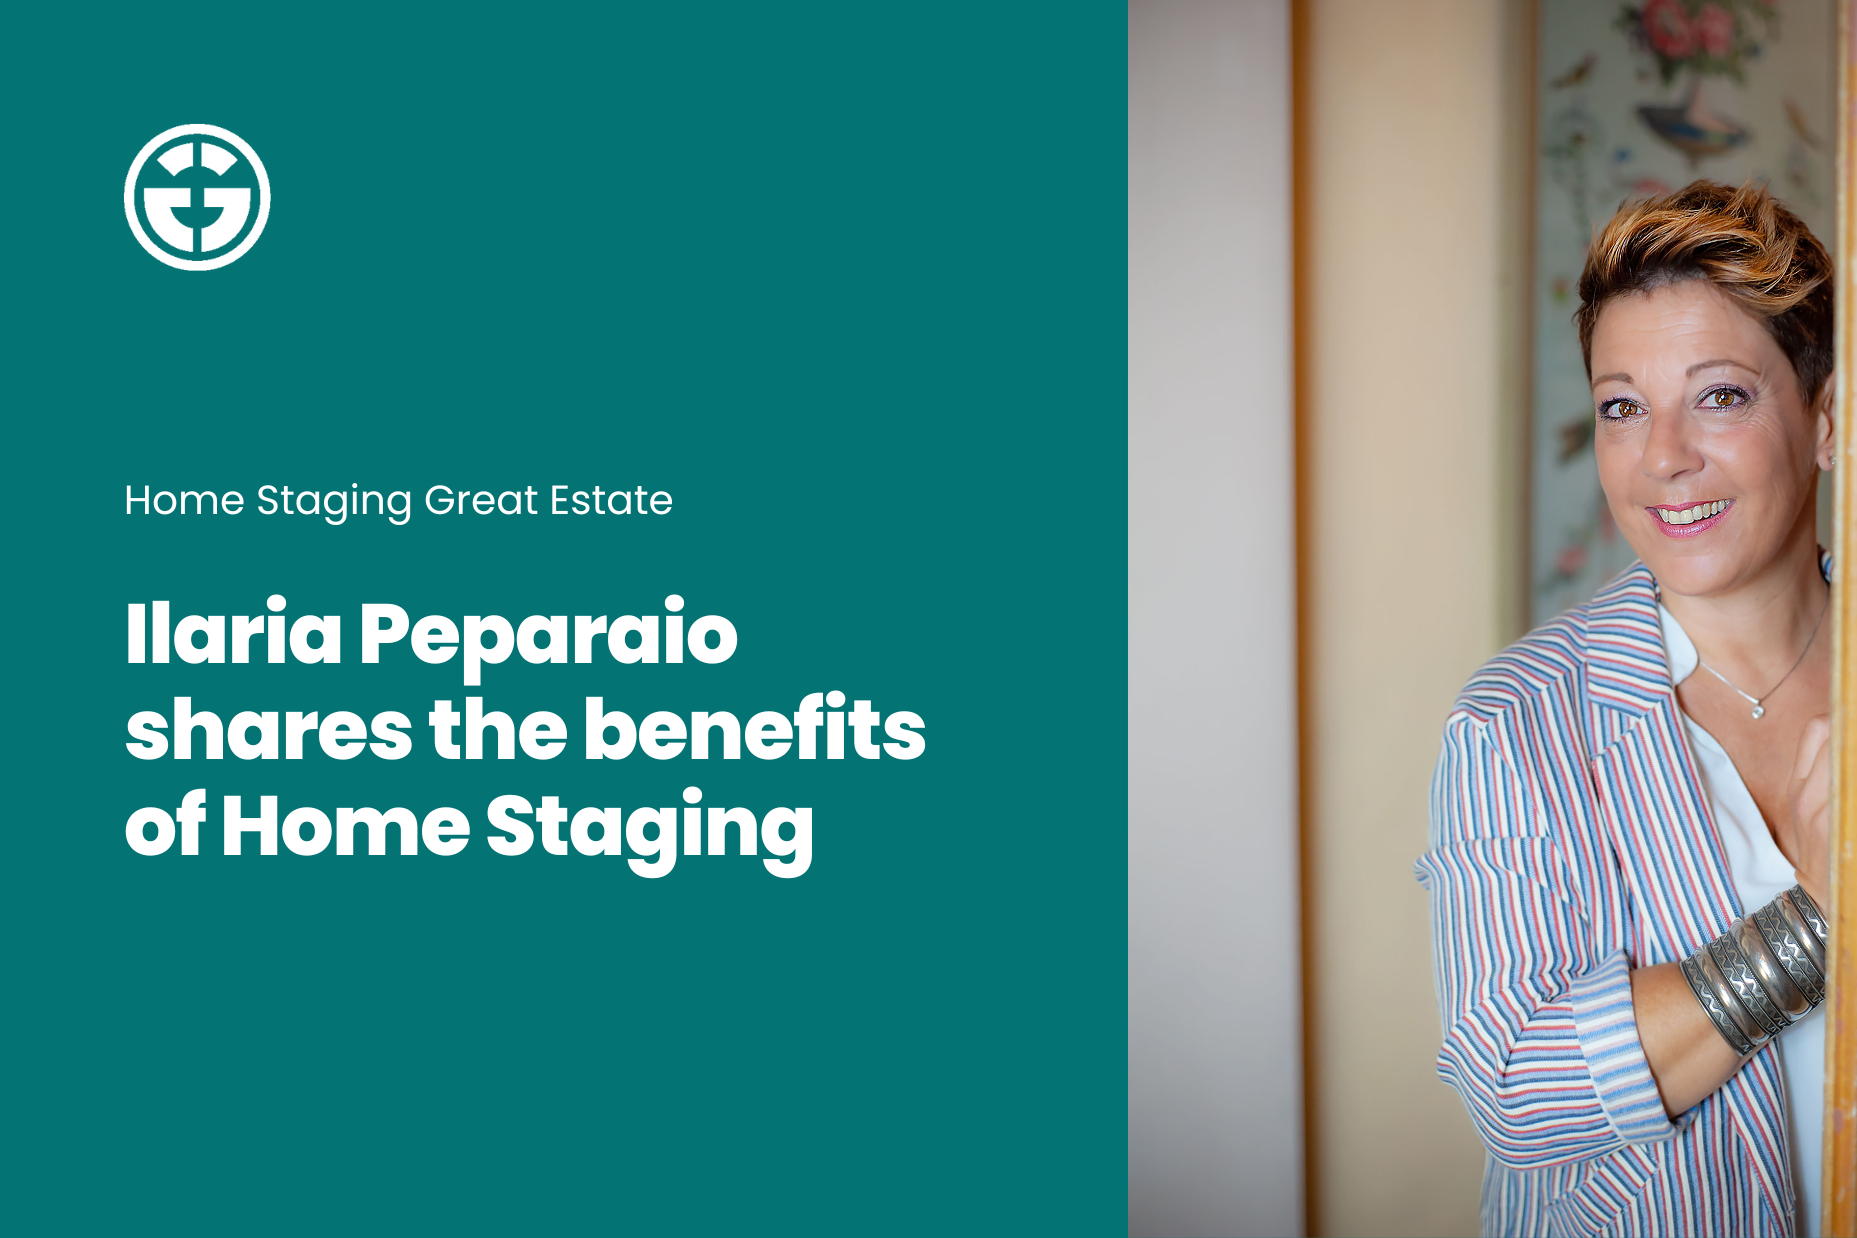 Home Staging: Ilaria Peparaio shares her ideas and the benefits of this effective marketing strategy